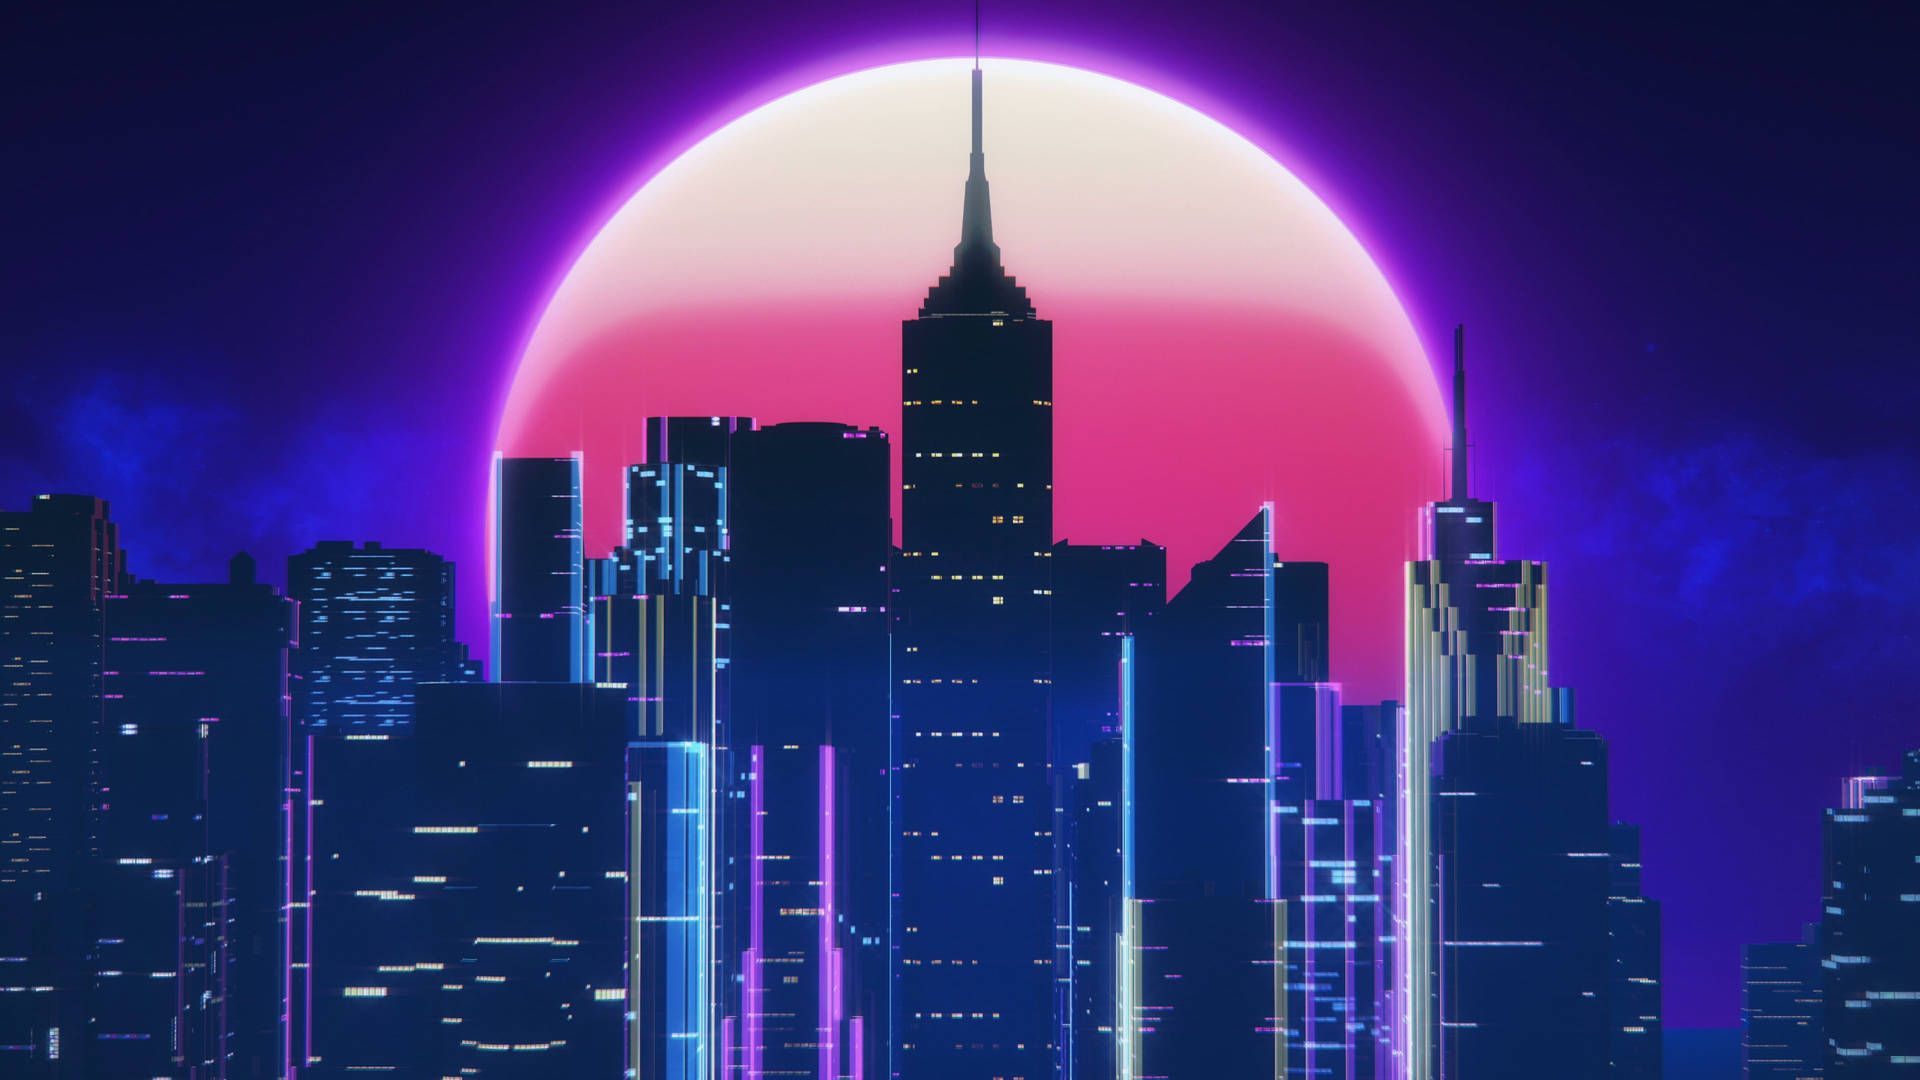 A city skyline at night with a giant glowing ball of light in the sky - Night, neon